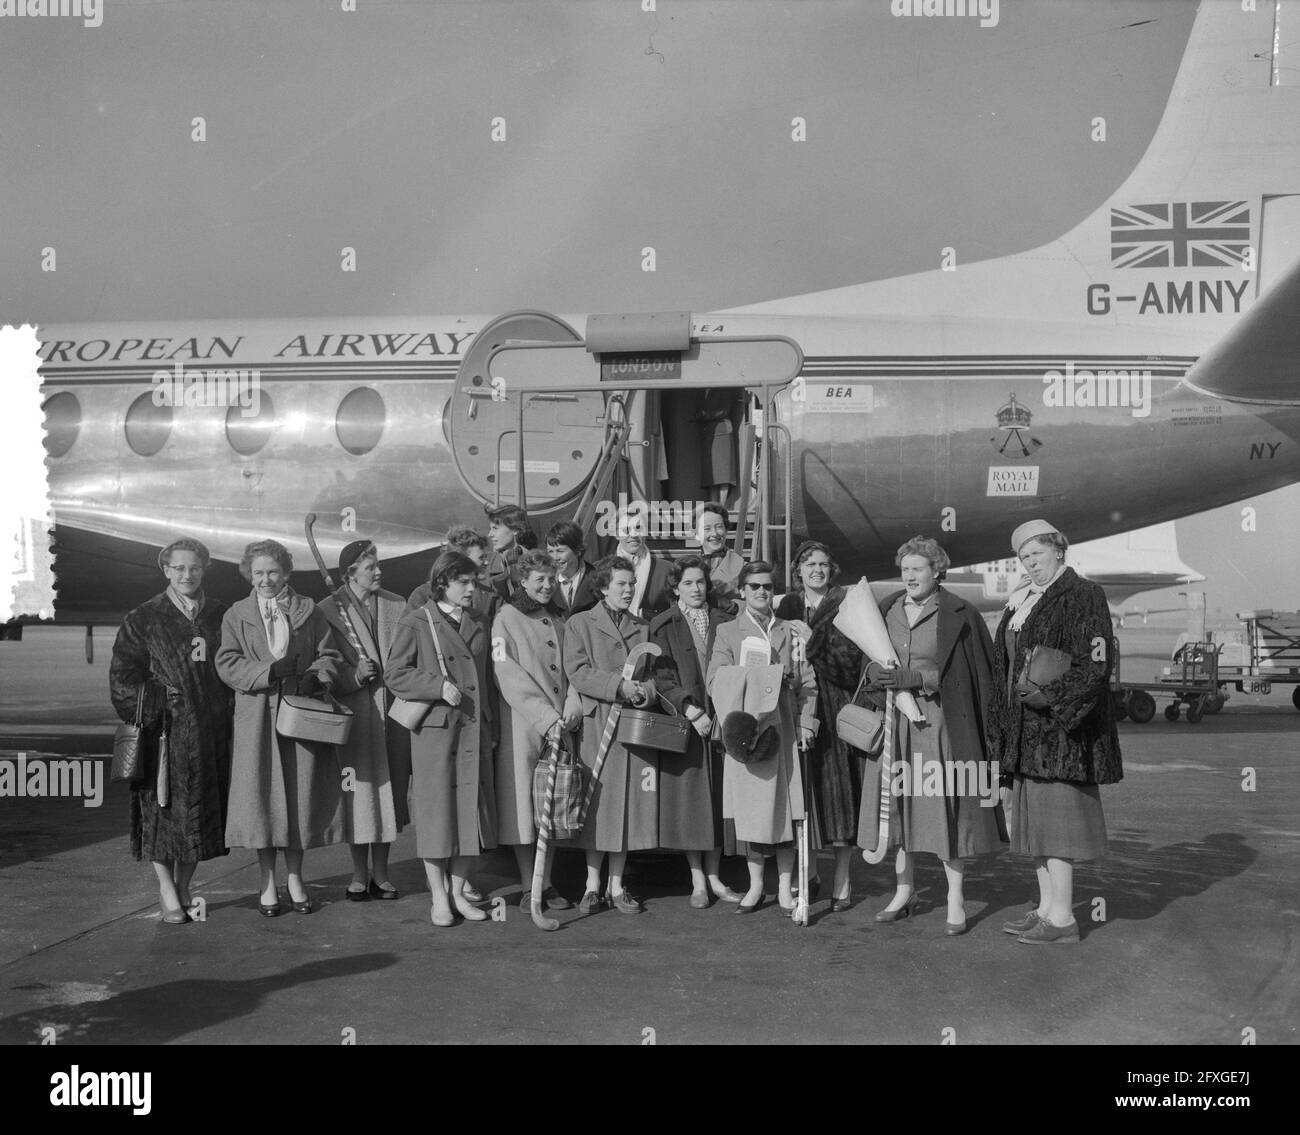 Departure of ladies Hockey team to Edinburgh, March 1, 1957, DEPARTURE, field hockey teams, The Netherlands, 20th century press agency photo, news to remember, documentary, historic photography 1945-1990, visual stories, human history of the Twentieth Century, capturing moments in time Stock Photo